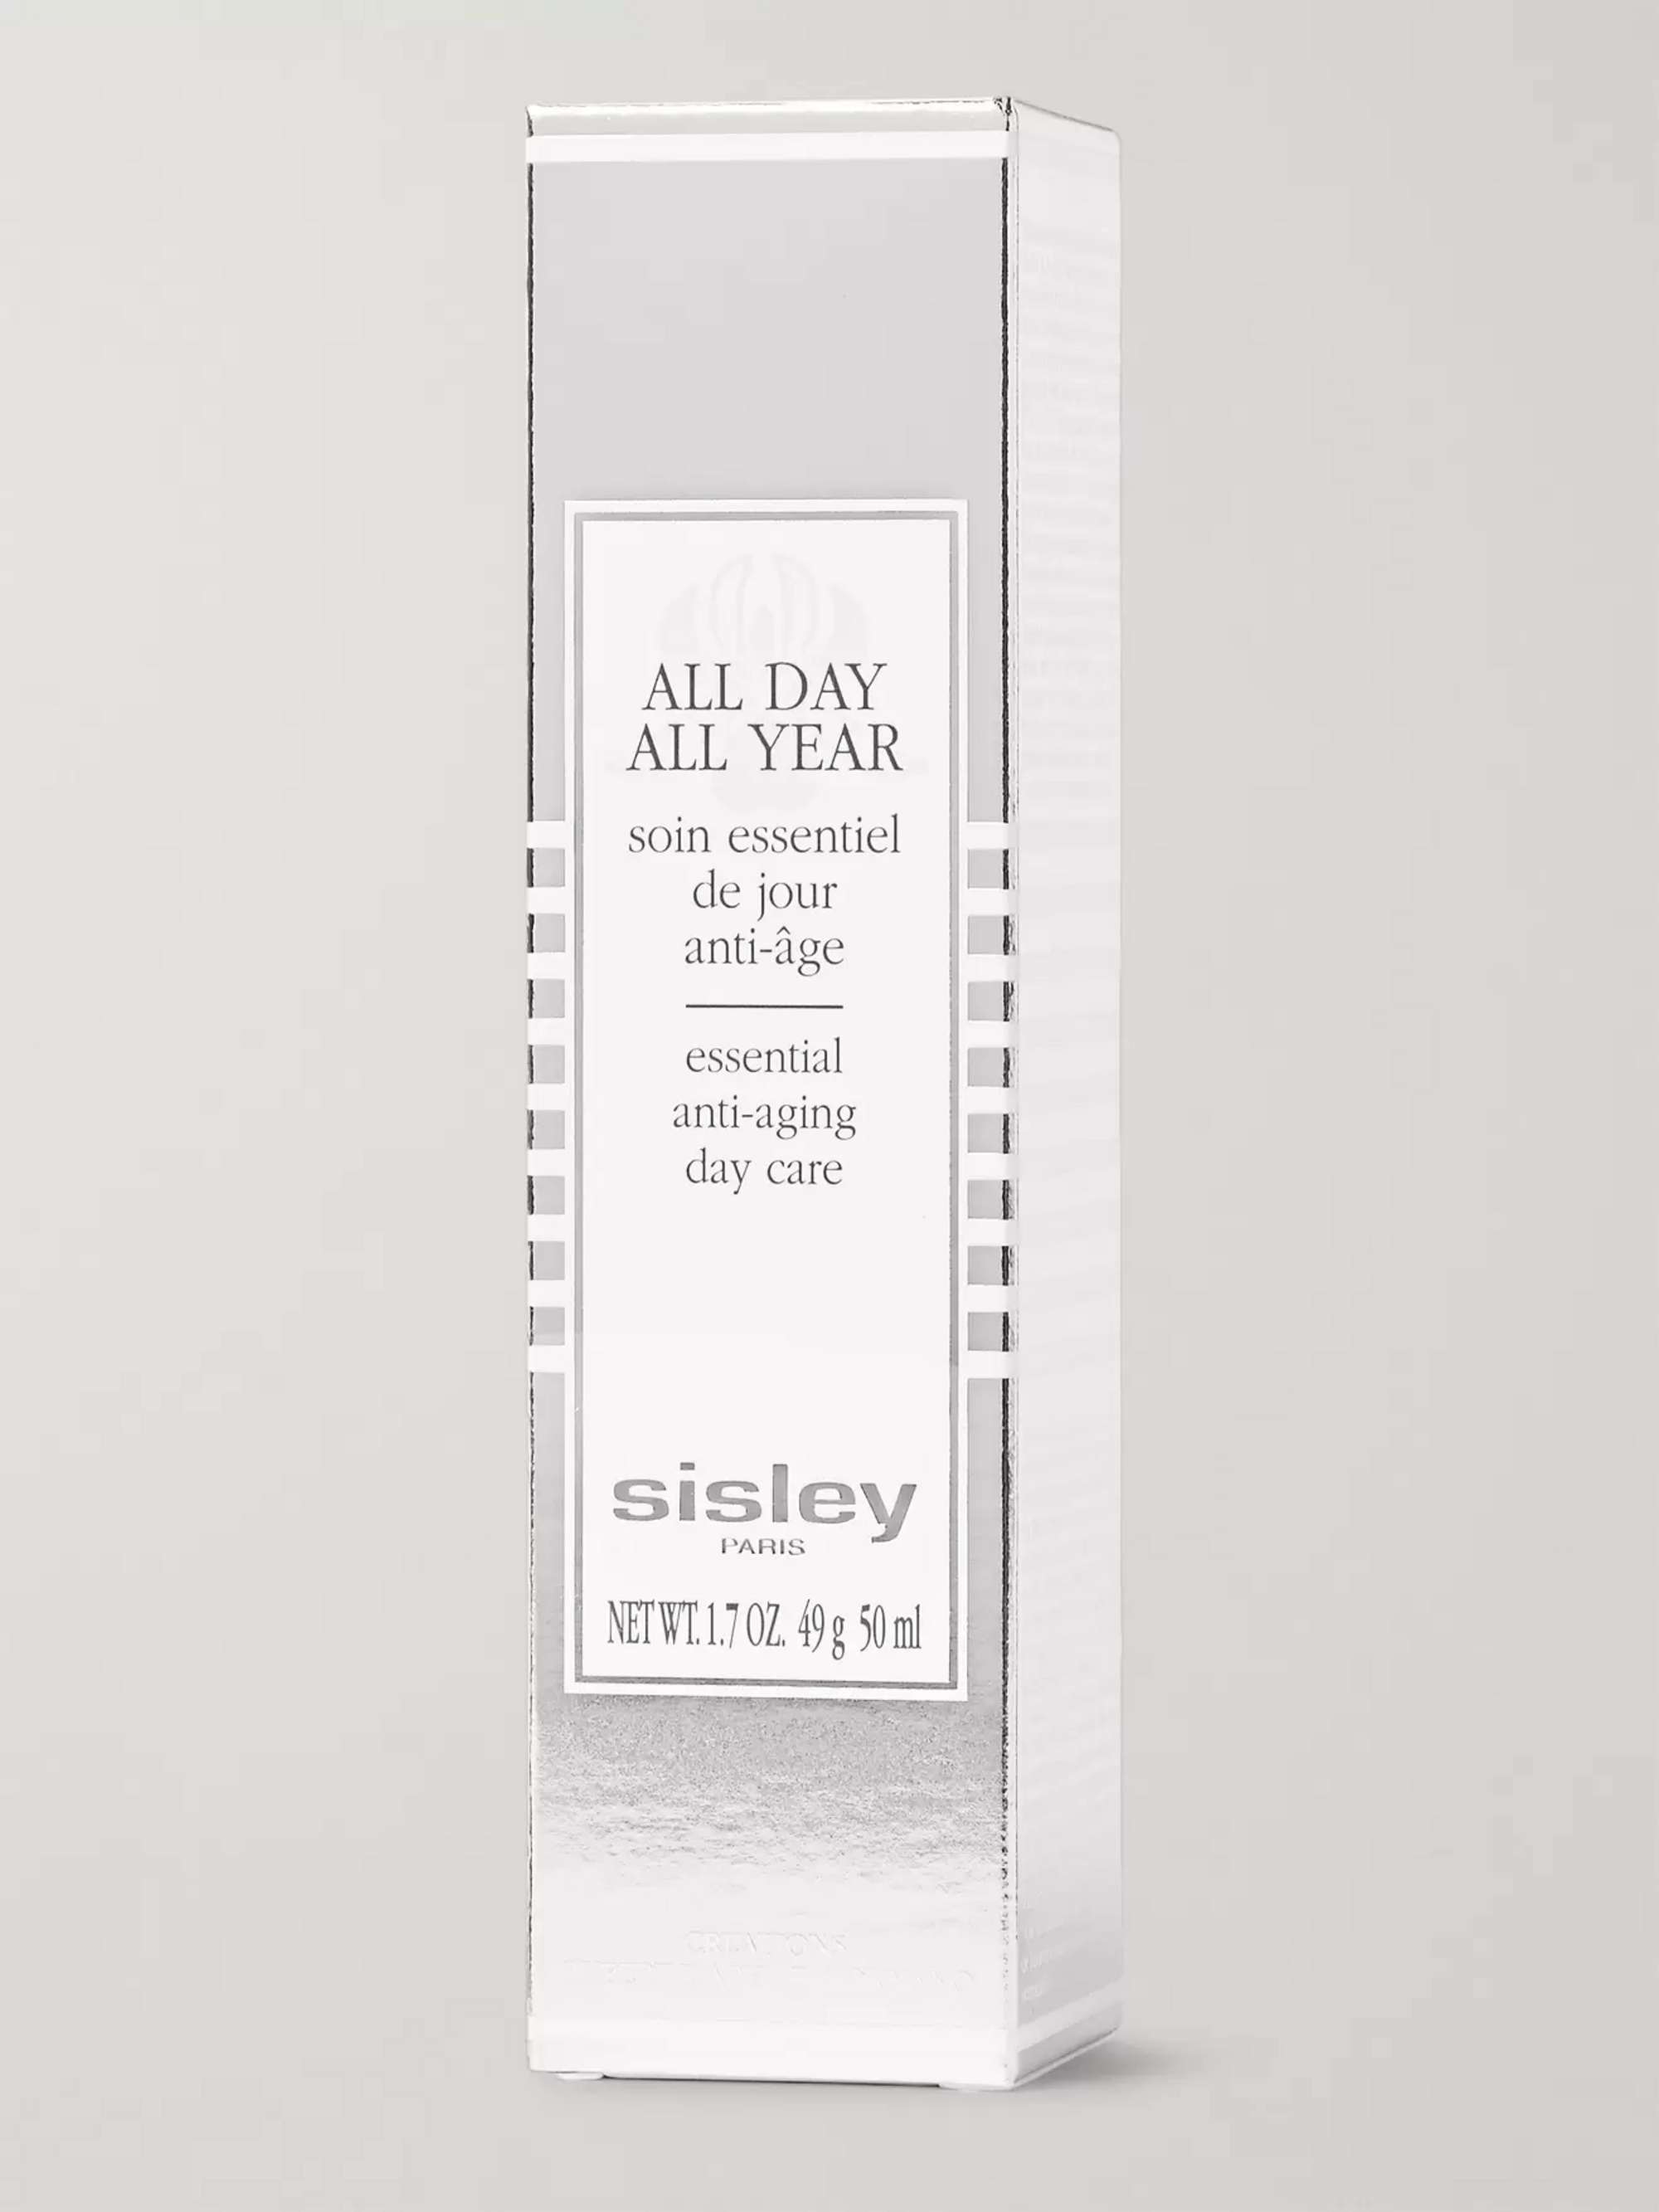 SISLEY All Day All Year Essential Anti-Aging Day Care, 50ml